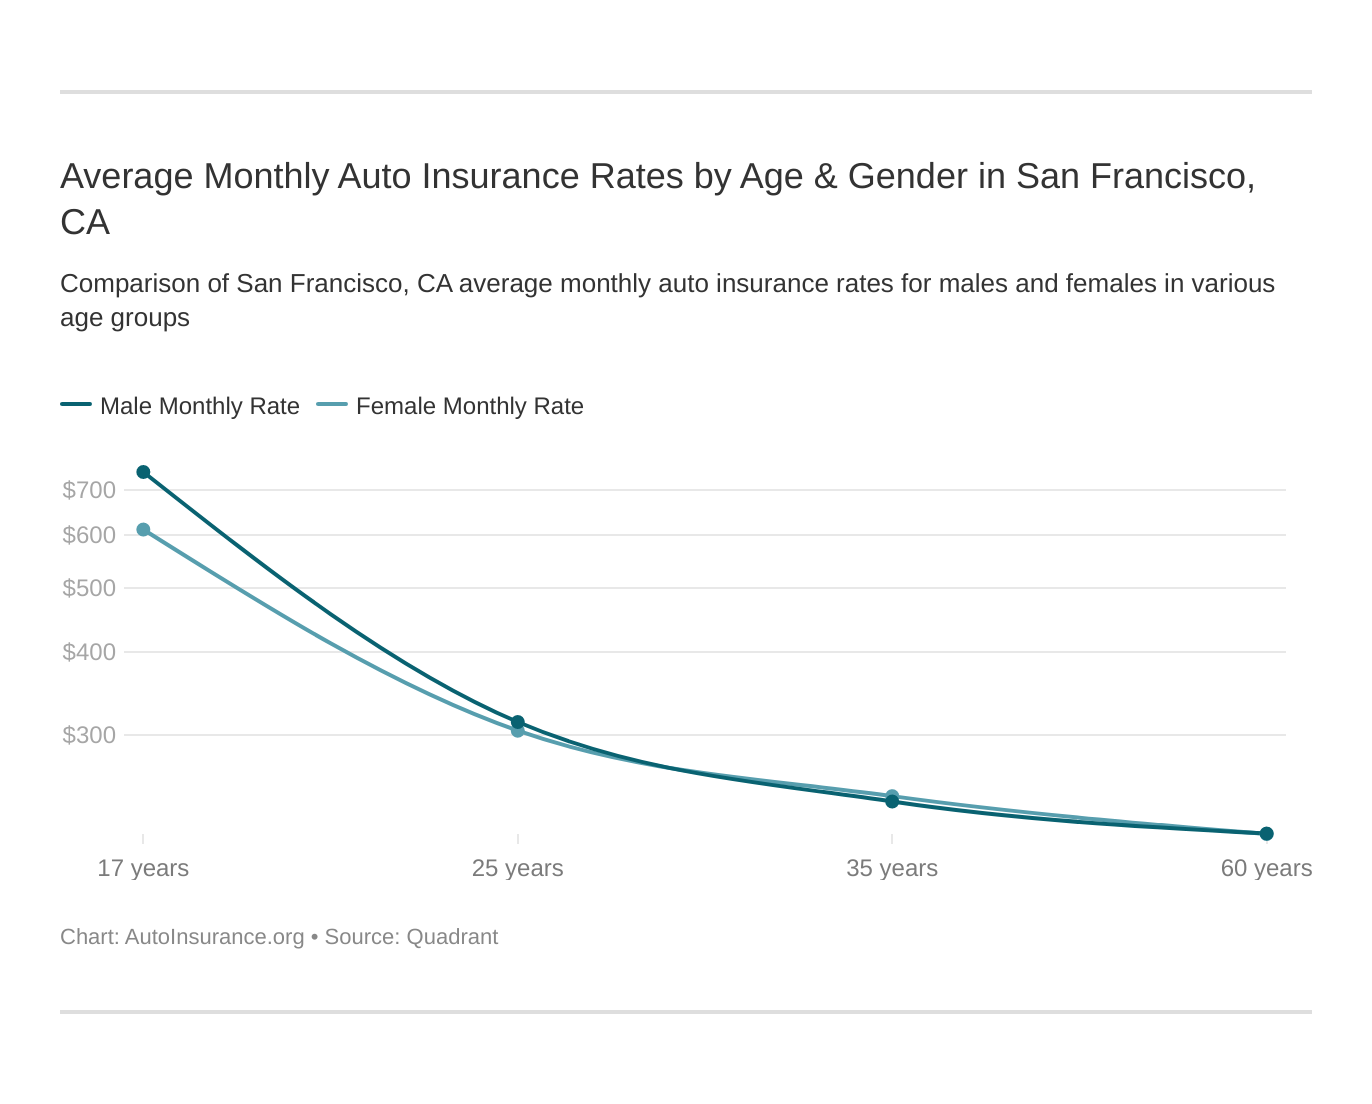 Average Monthly Auto Insurance Rates by Age & Gender in San Francisco, CA